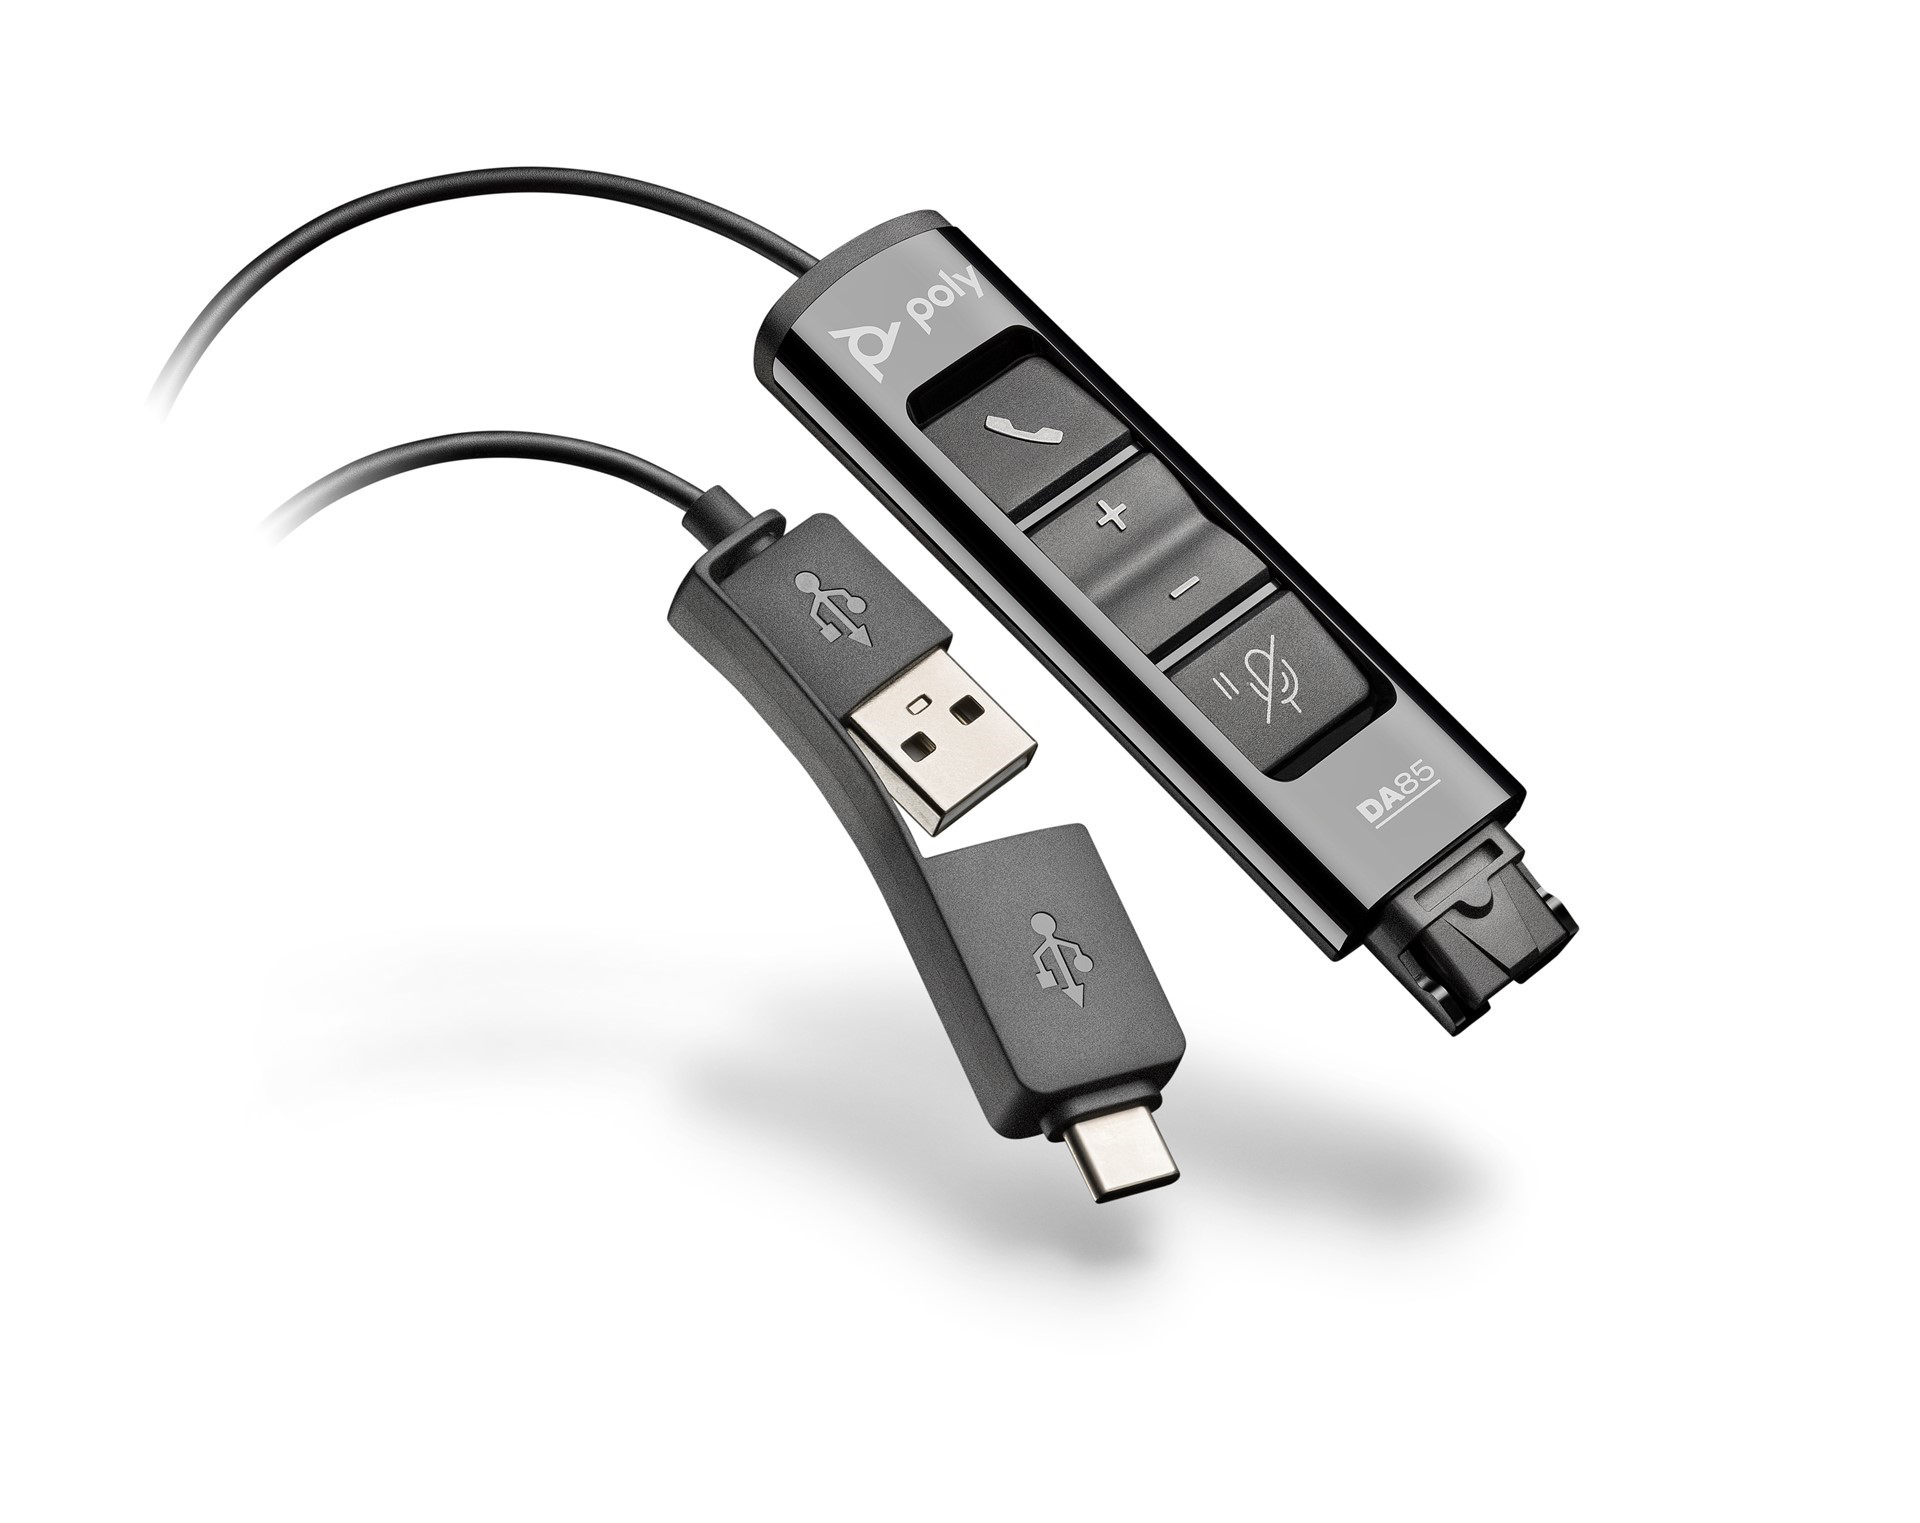 PO-218267-01 Poly DA85 is an USB-A & USB-C adatper for all Plantronics (Poly) Quick Disconnect (QD) headsets (including the SHR2083-01).